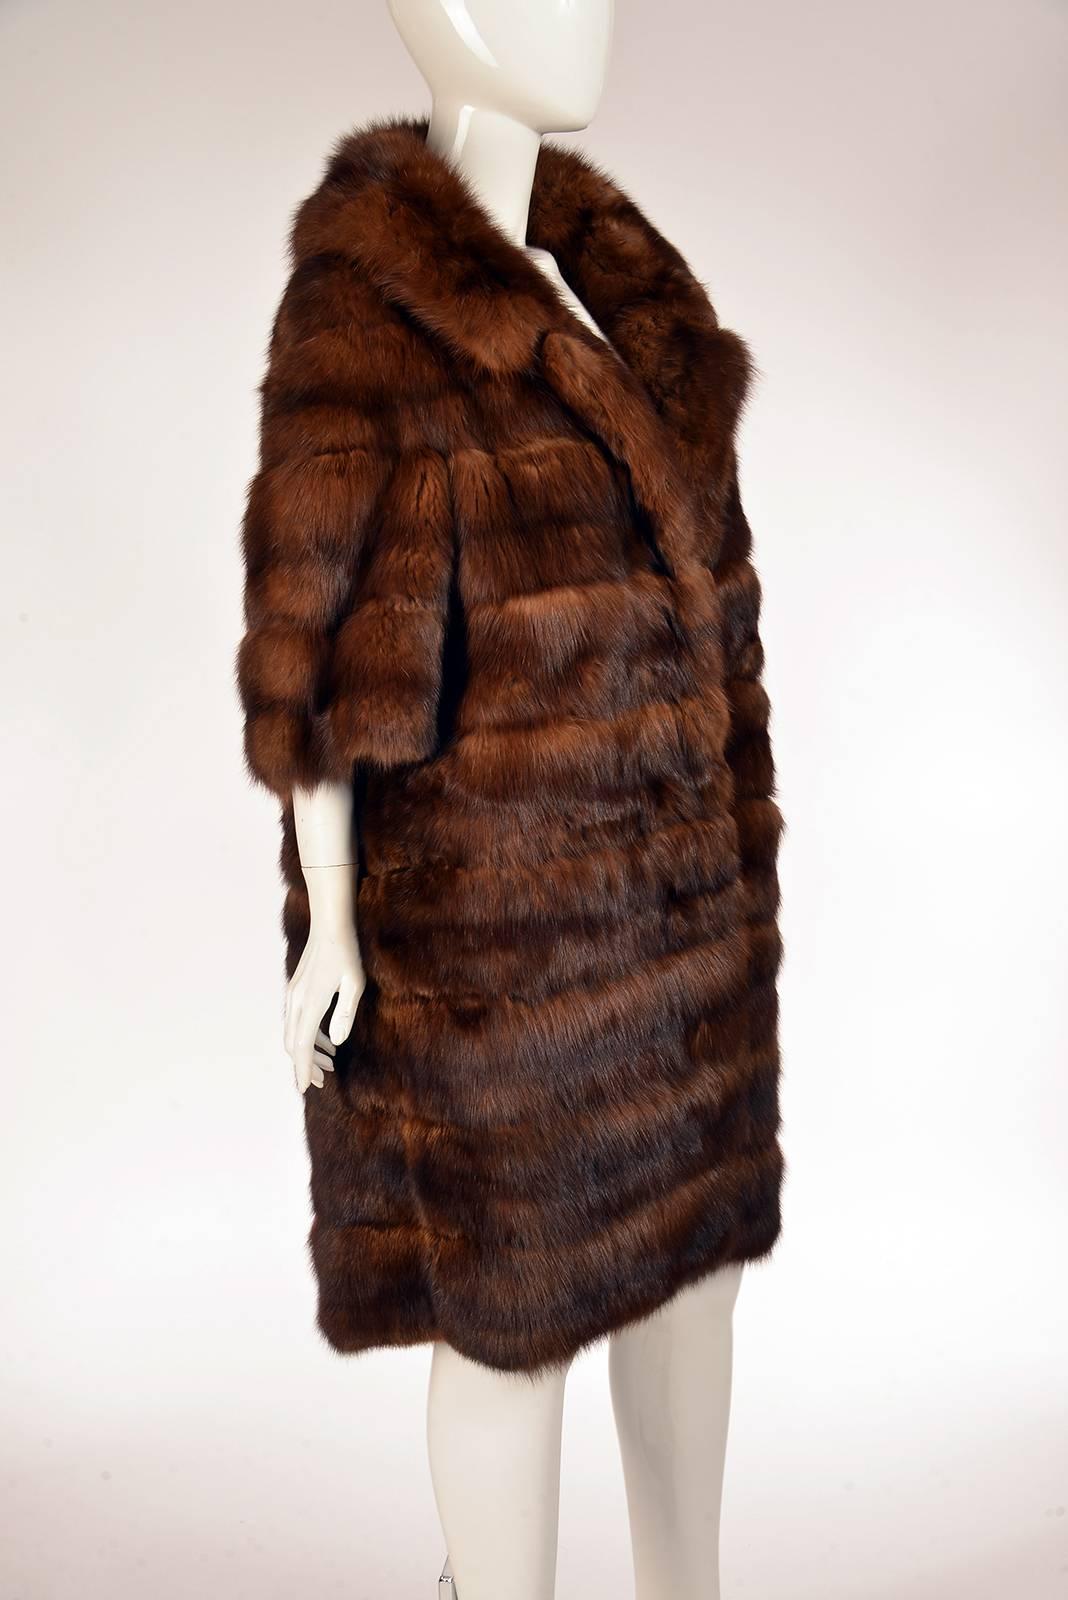 Unbelievable 1950s timeless Maximilian rich mink coat. Femininity is expressed in the details of the design with three quarter sleeves, knee length and it's large collar. Thoughtful design with horizontal stripes and cut creating a lovely